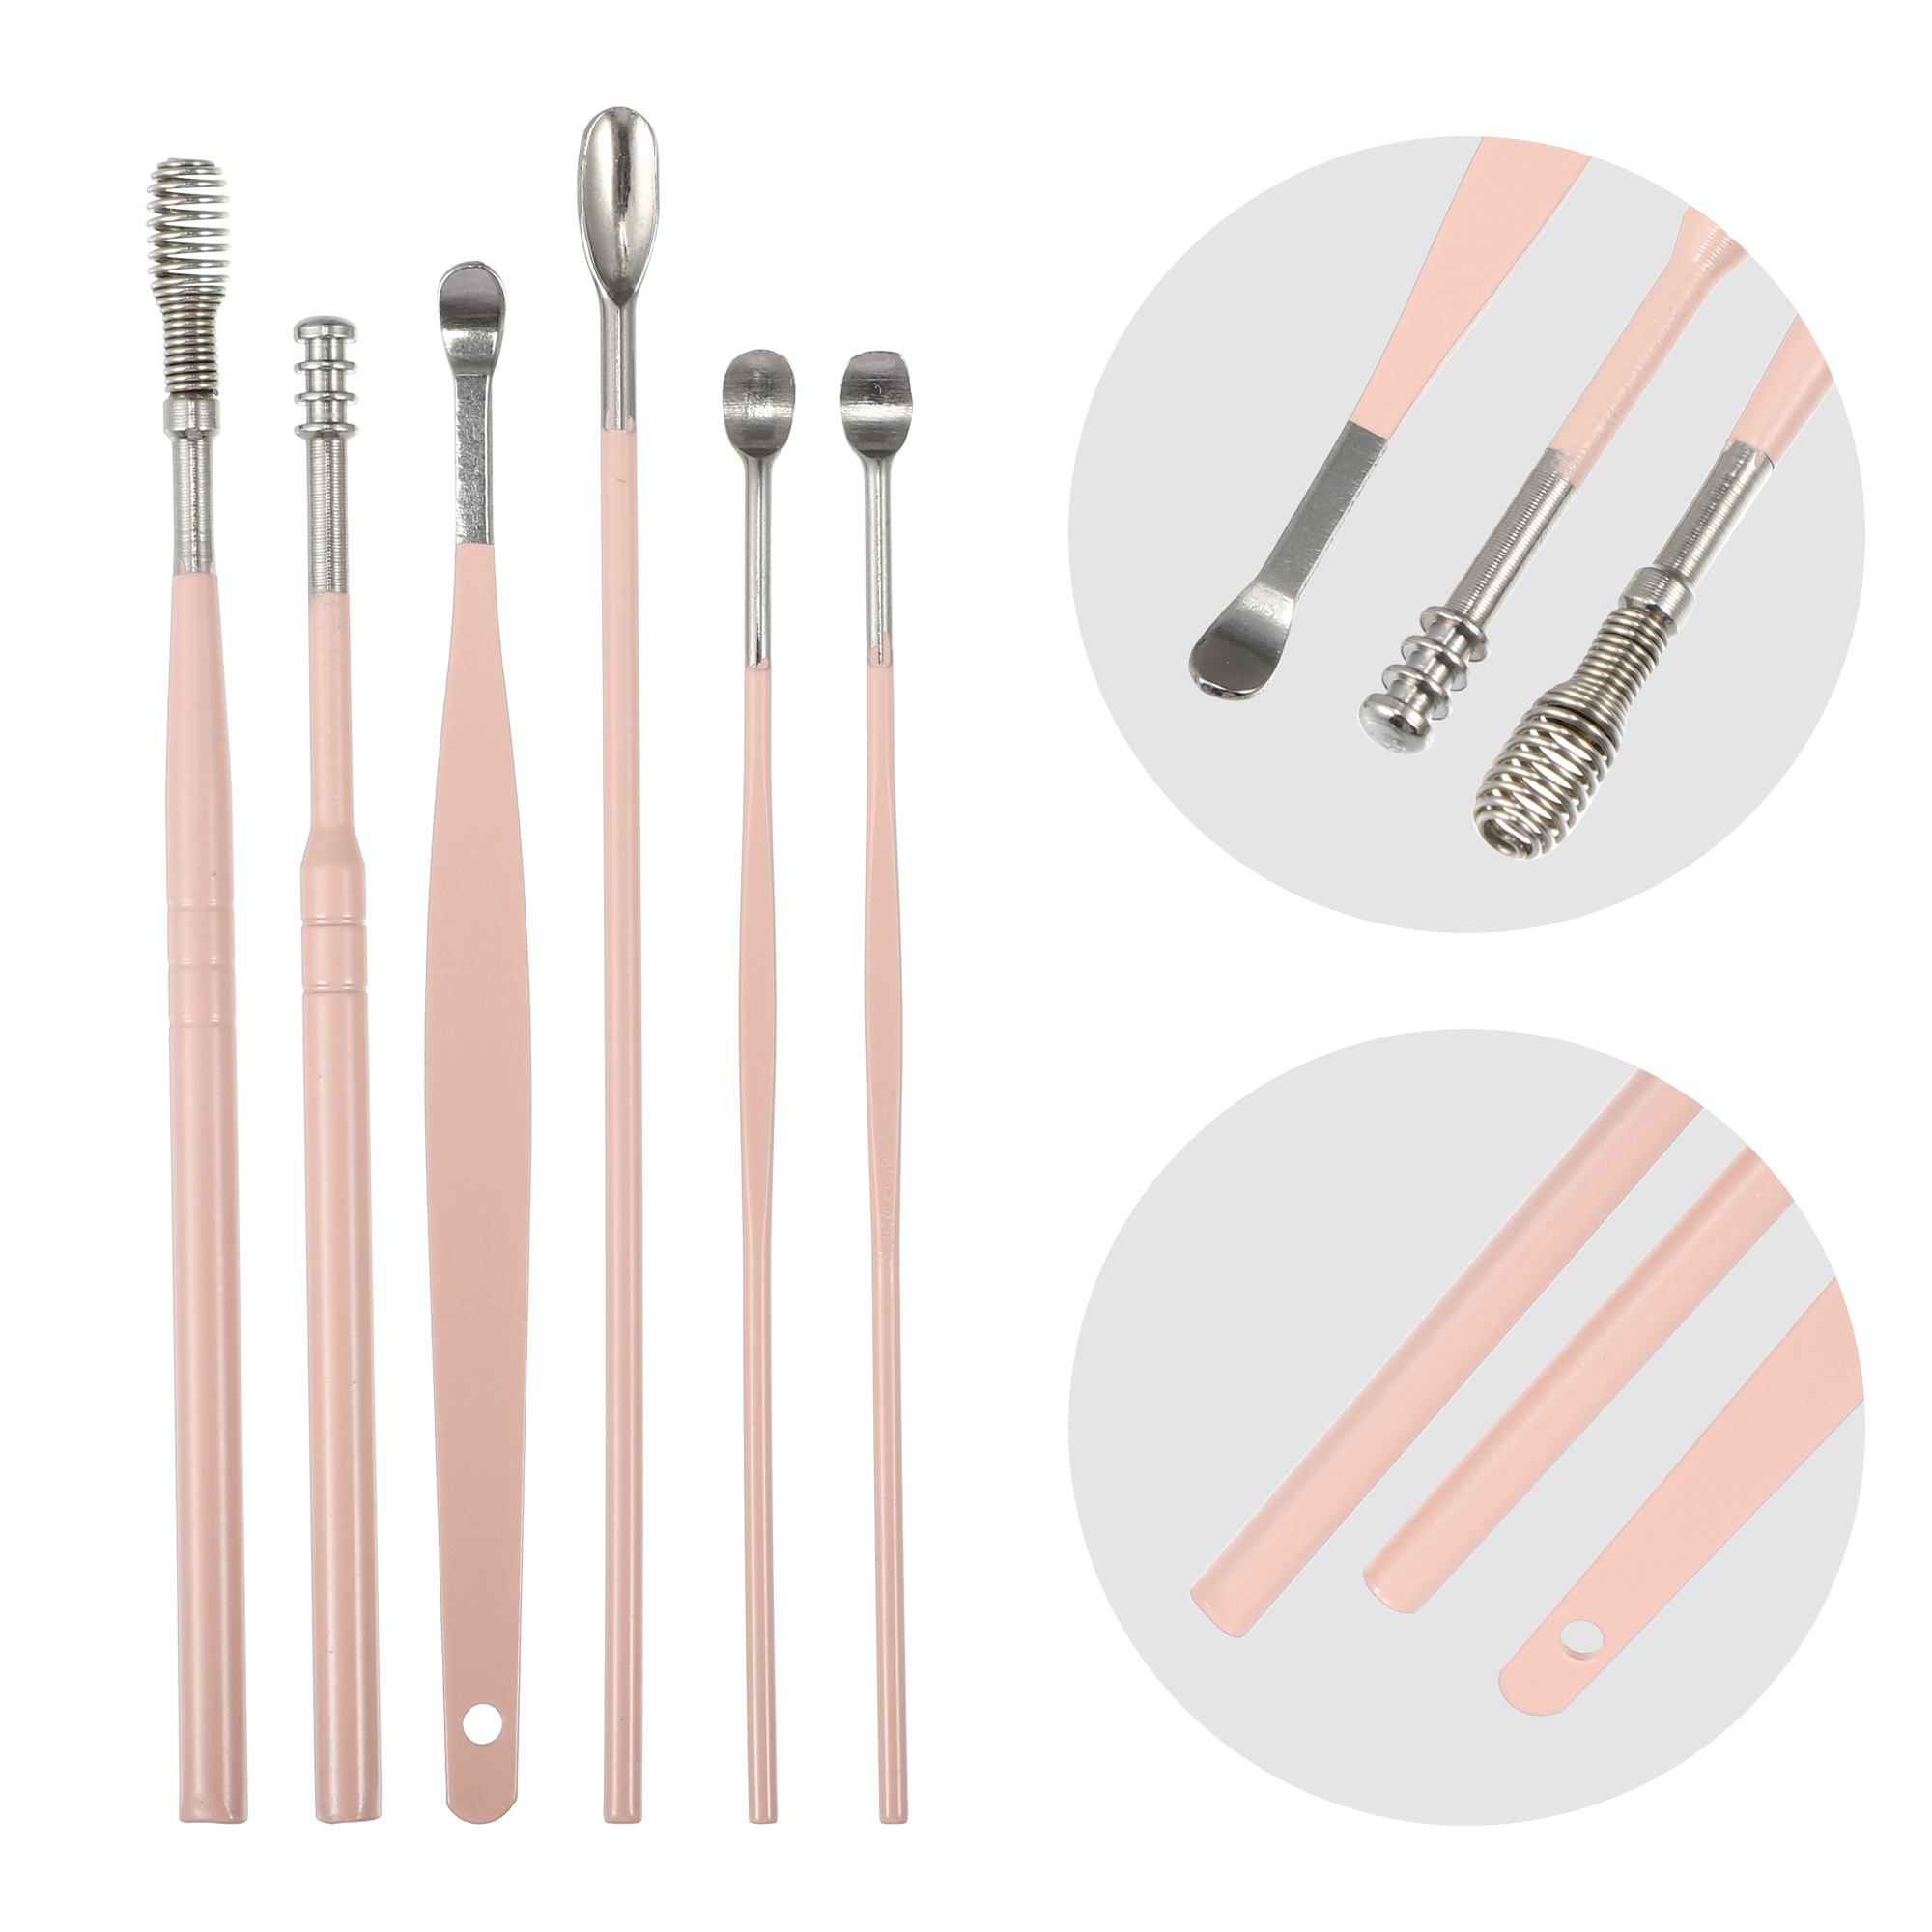 Unique Bargains 6Pcs Stainless Steel Ear Cleansing Tool Set with Faux Leather Packaging Pink